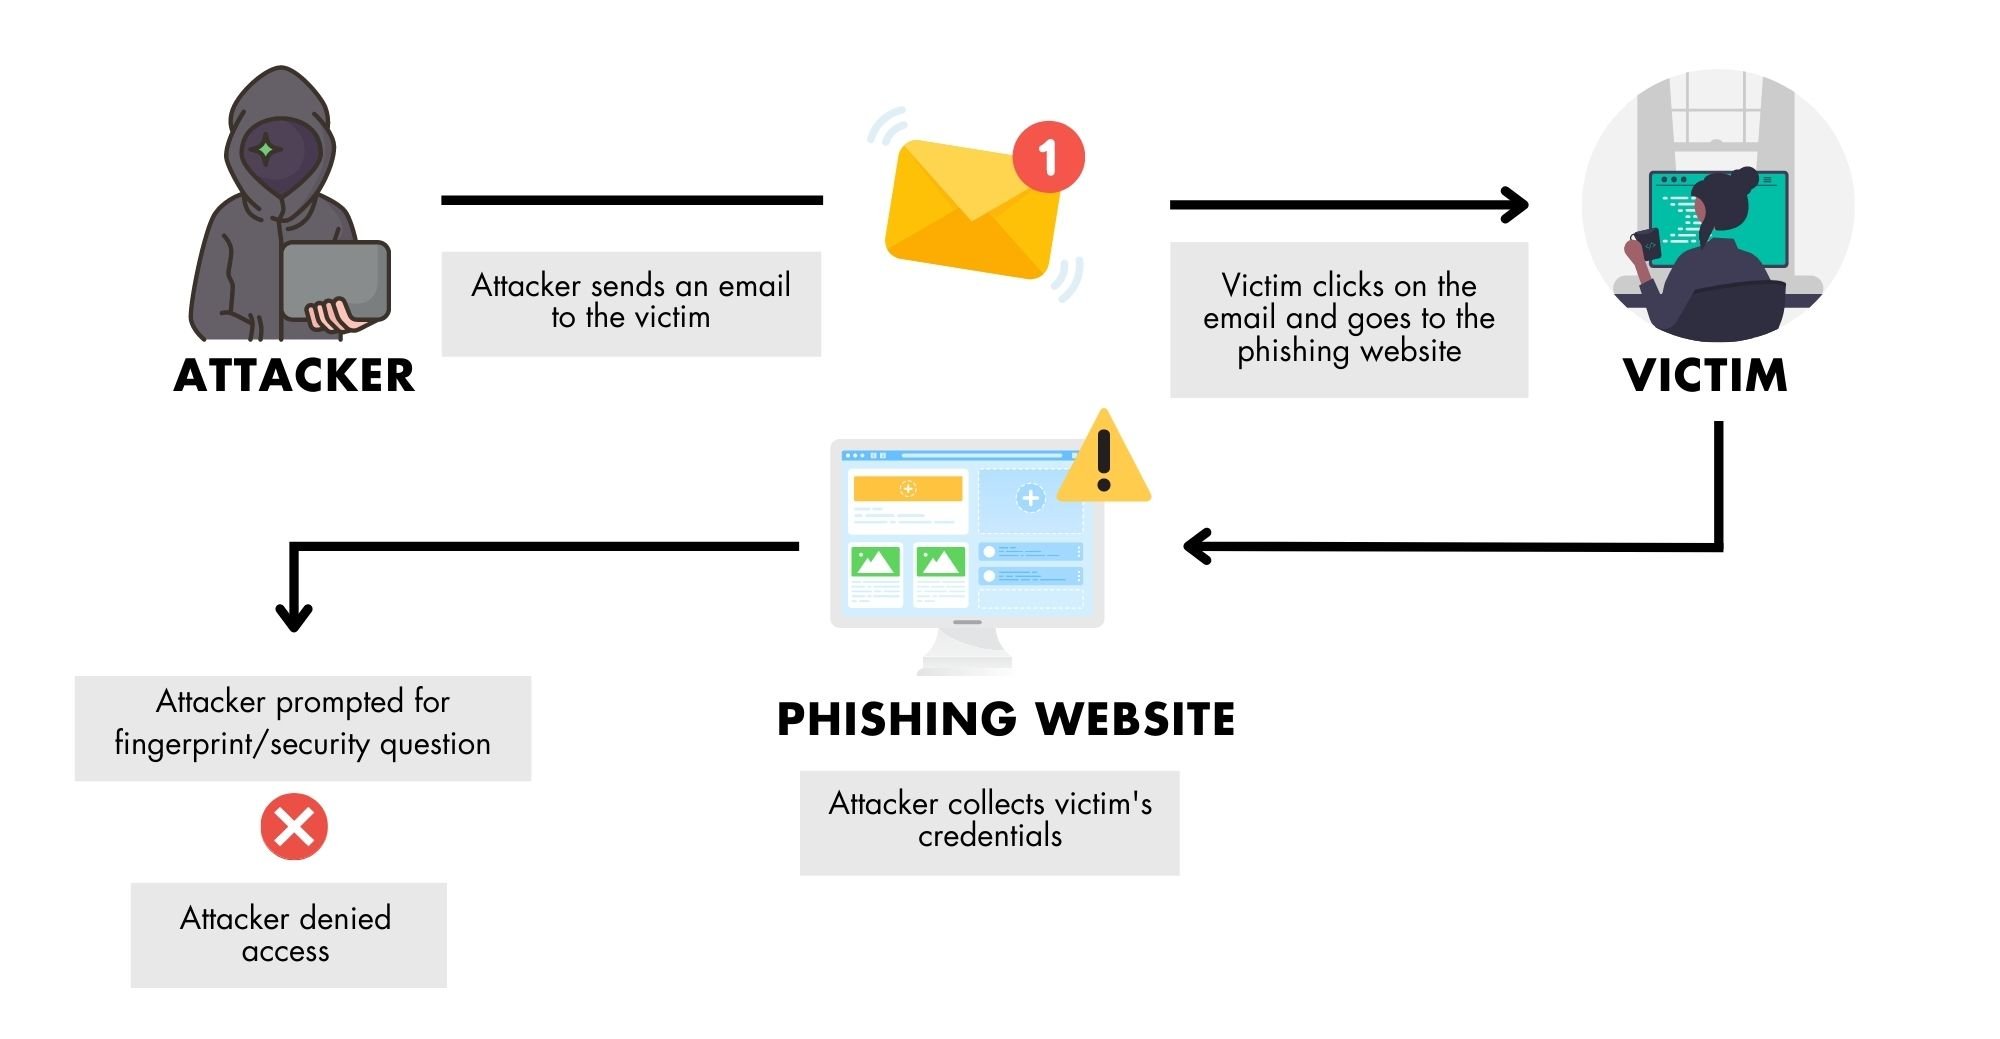 How does phishing work